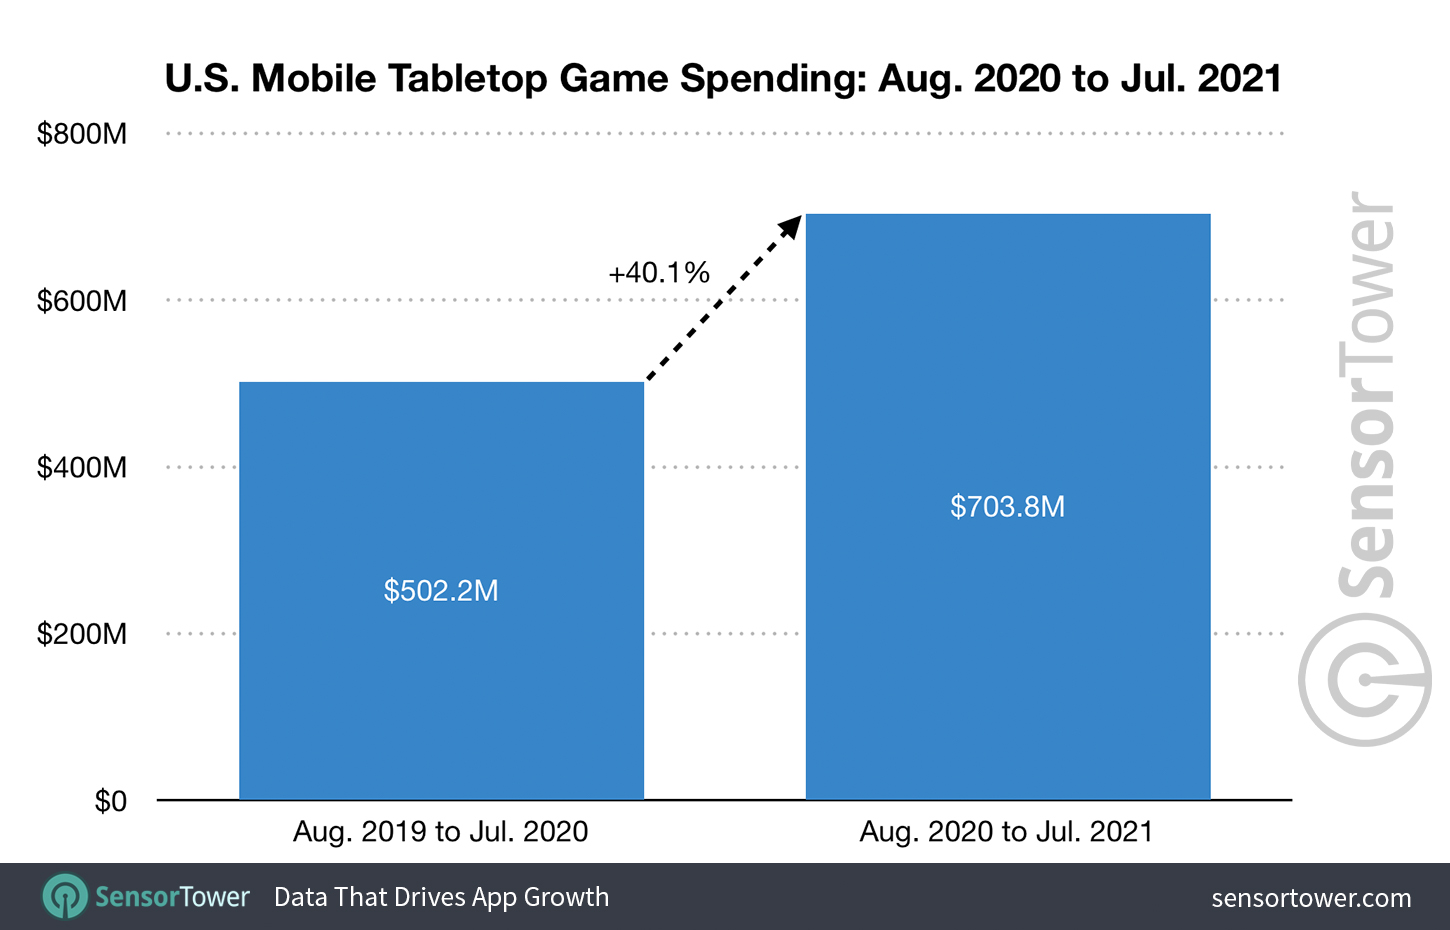 U.S. Mobile Tabletop Game Spending: August 2020 to July 2021